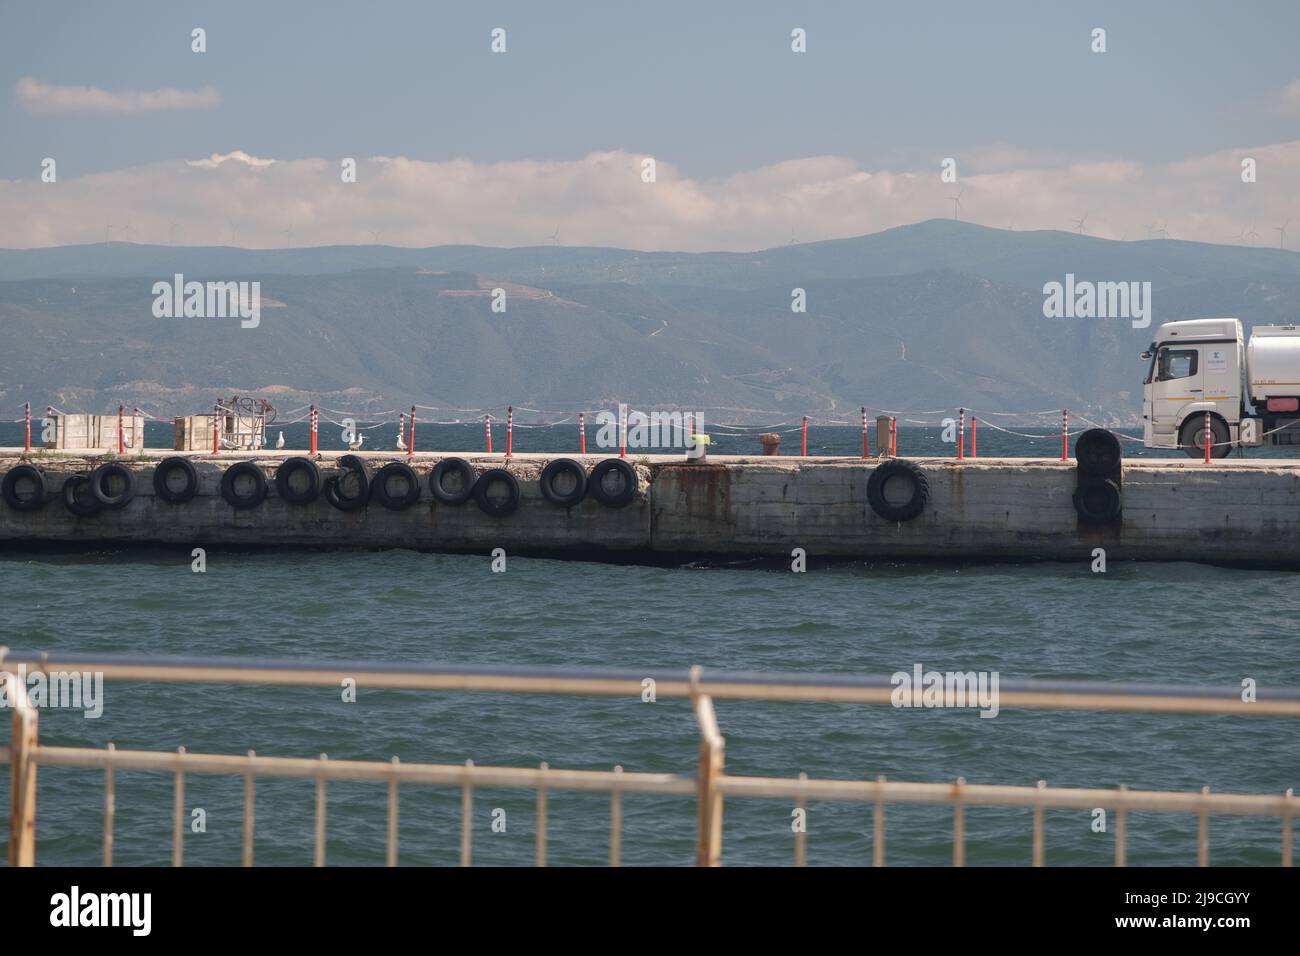 Pier and sea view, concrete port and truck side angle view. Stock Photo